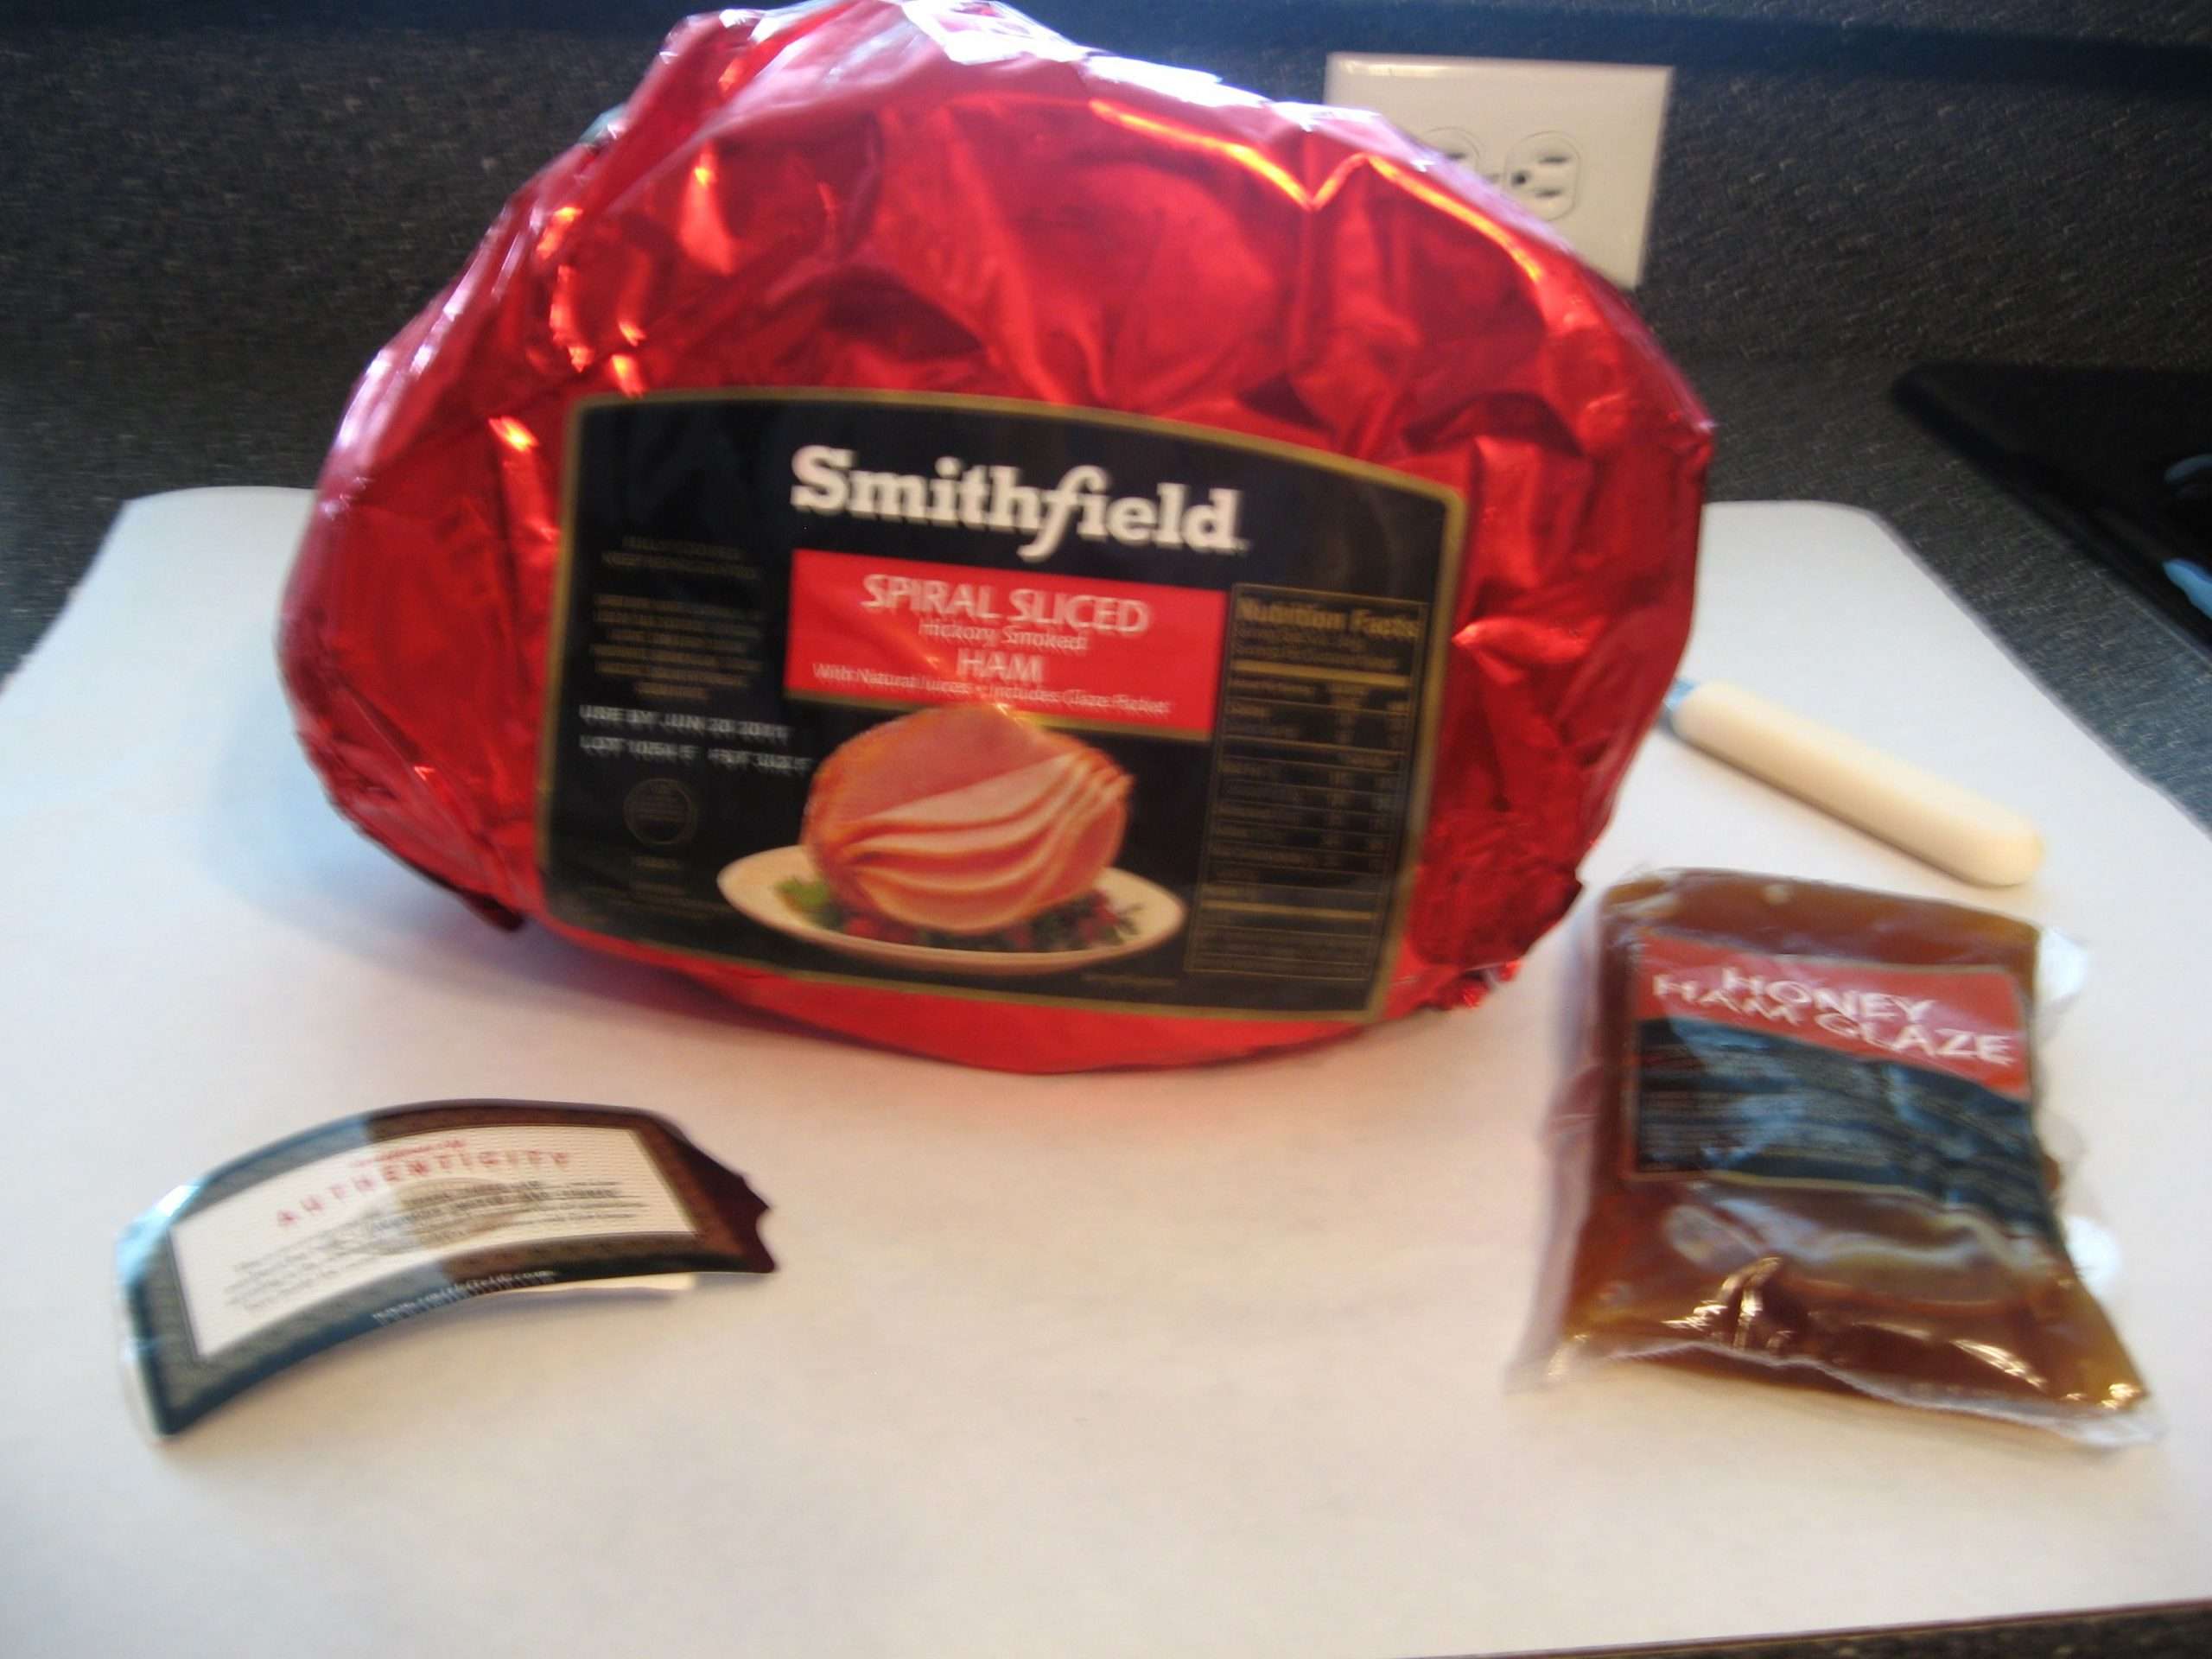 Smithfield Brand Spiral Hams Product Review